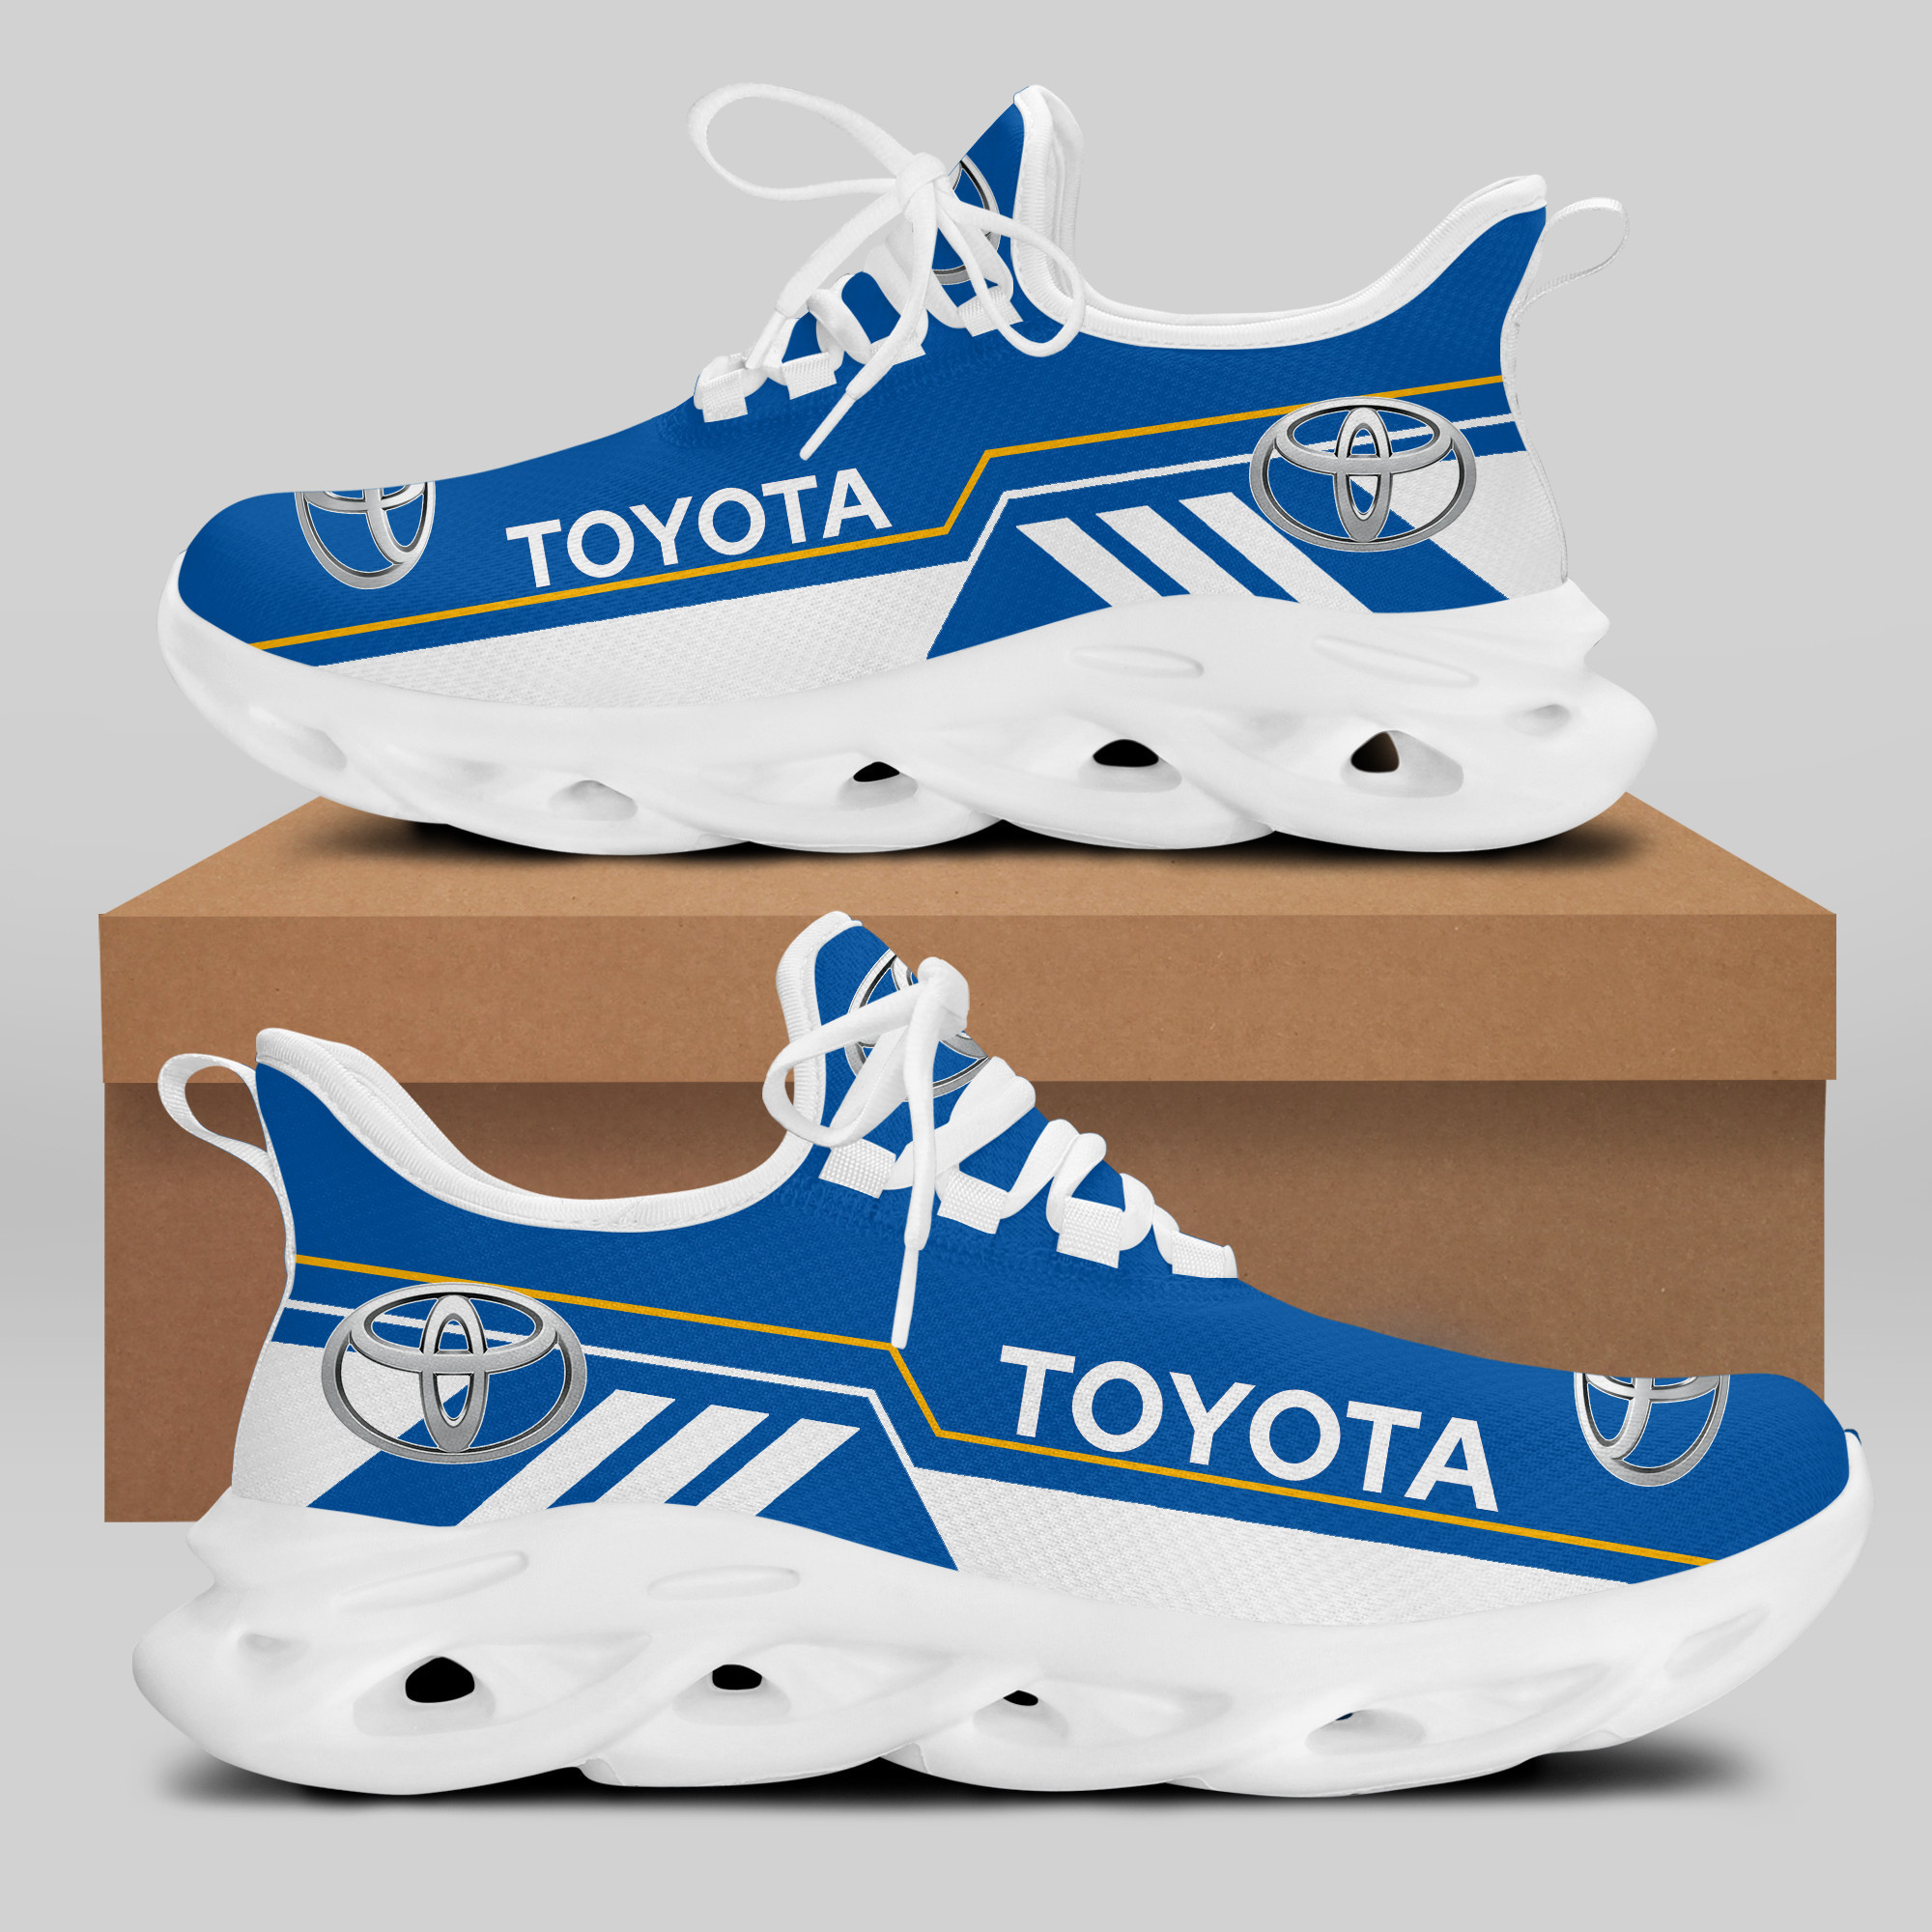 Toyota Sneakers RUNNING SHOES VER 12